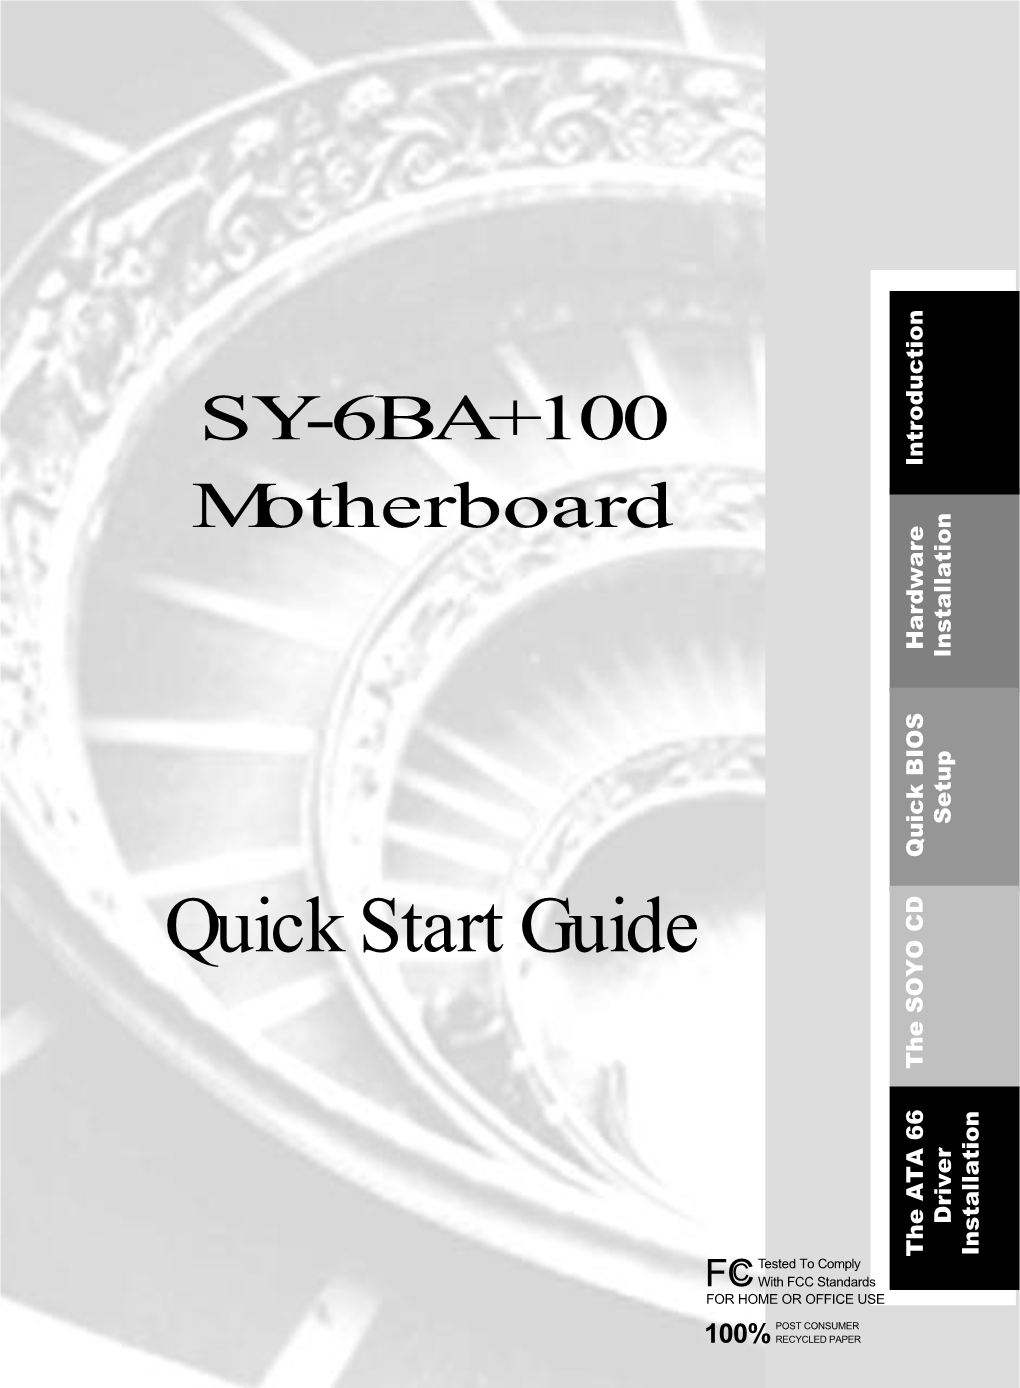 Quick Start Guide the S OY O CD Driver Installation the at a 66 Tested to Comply FCC with FCC Standards for HOME OR OFFICE USE